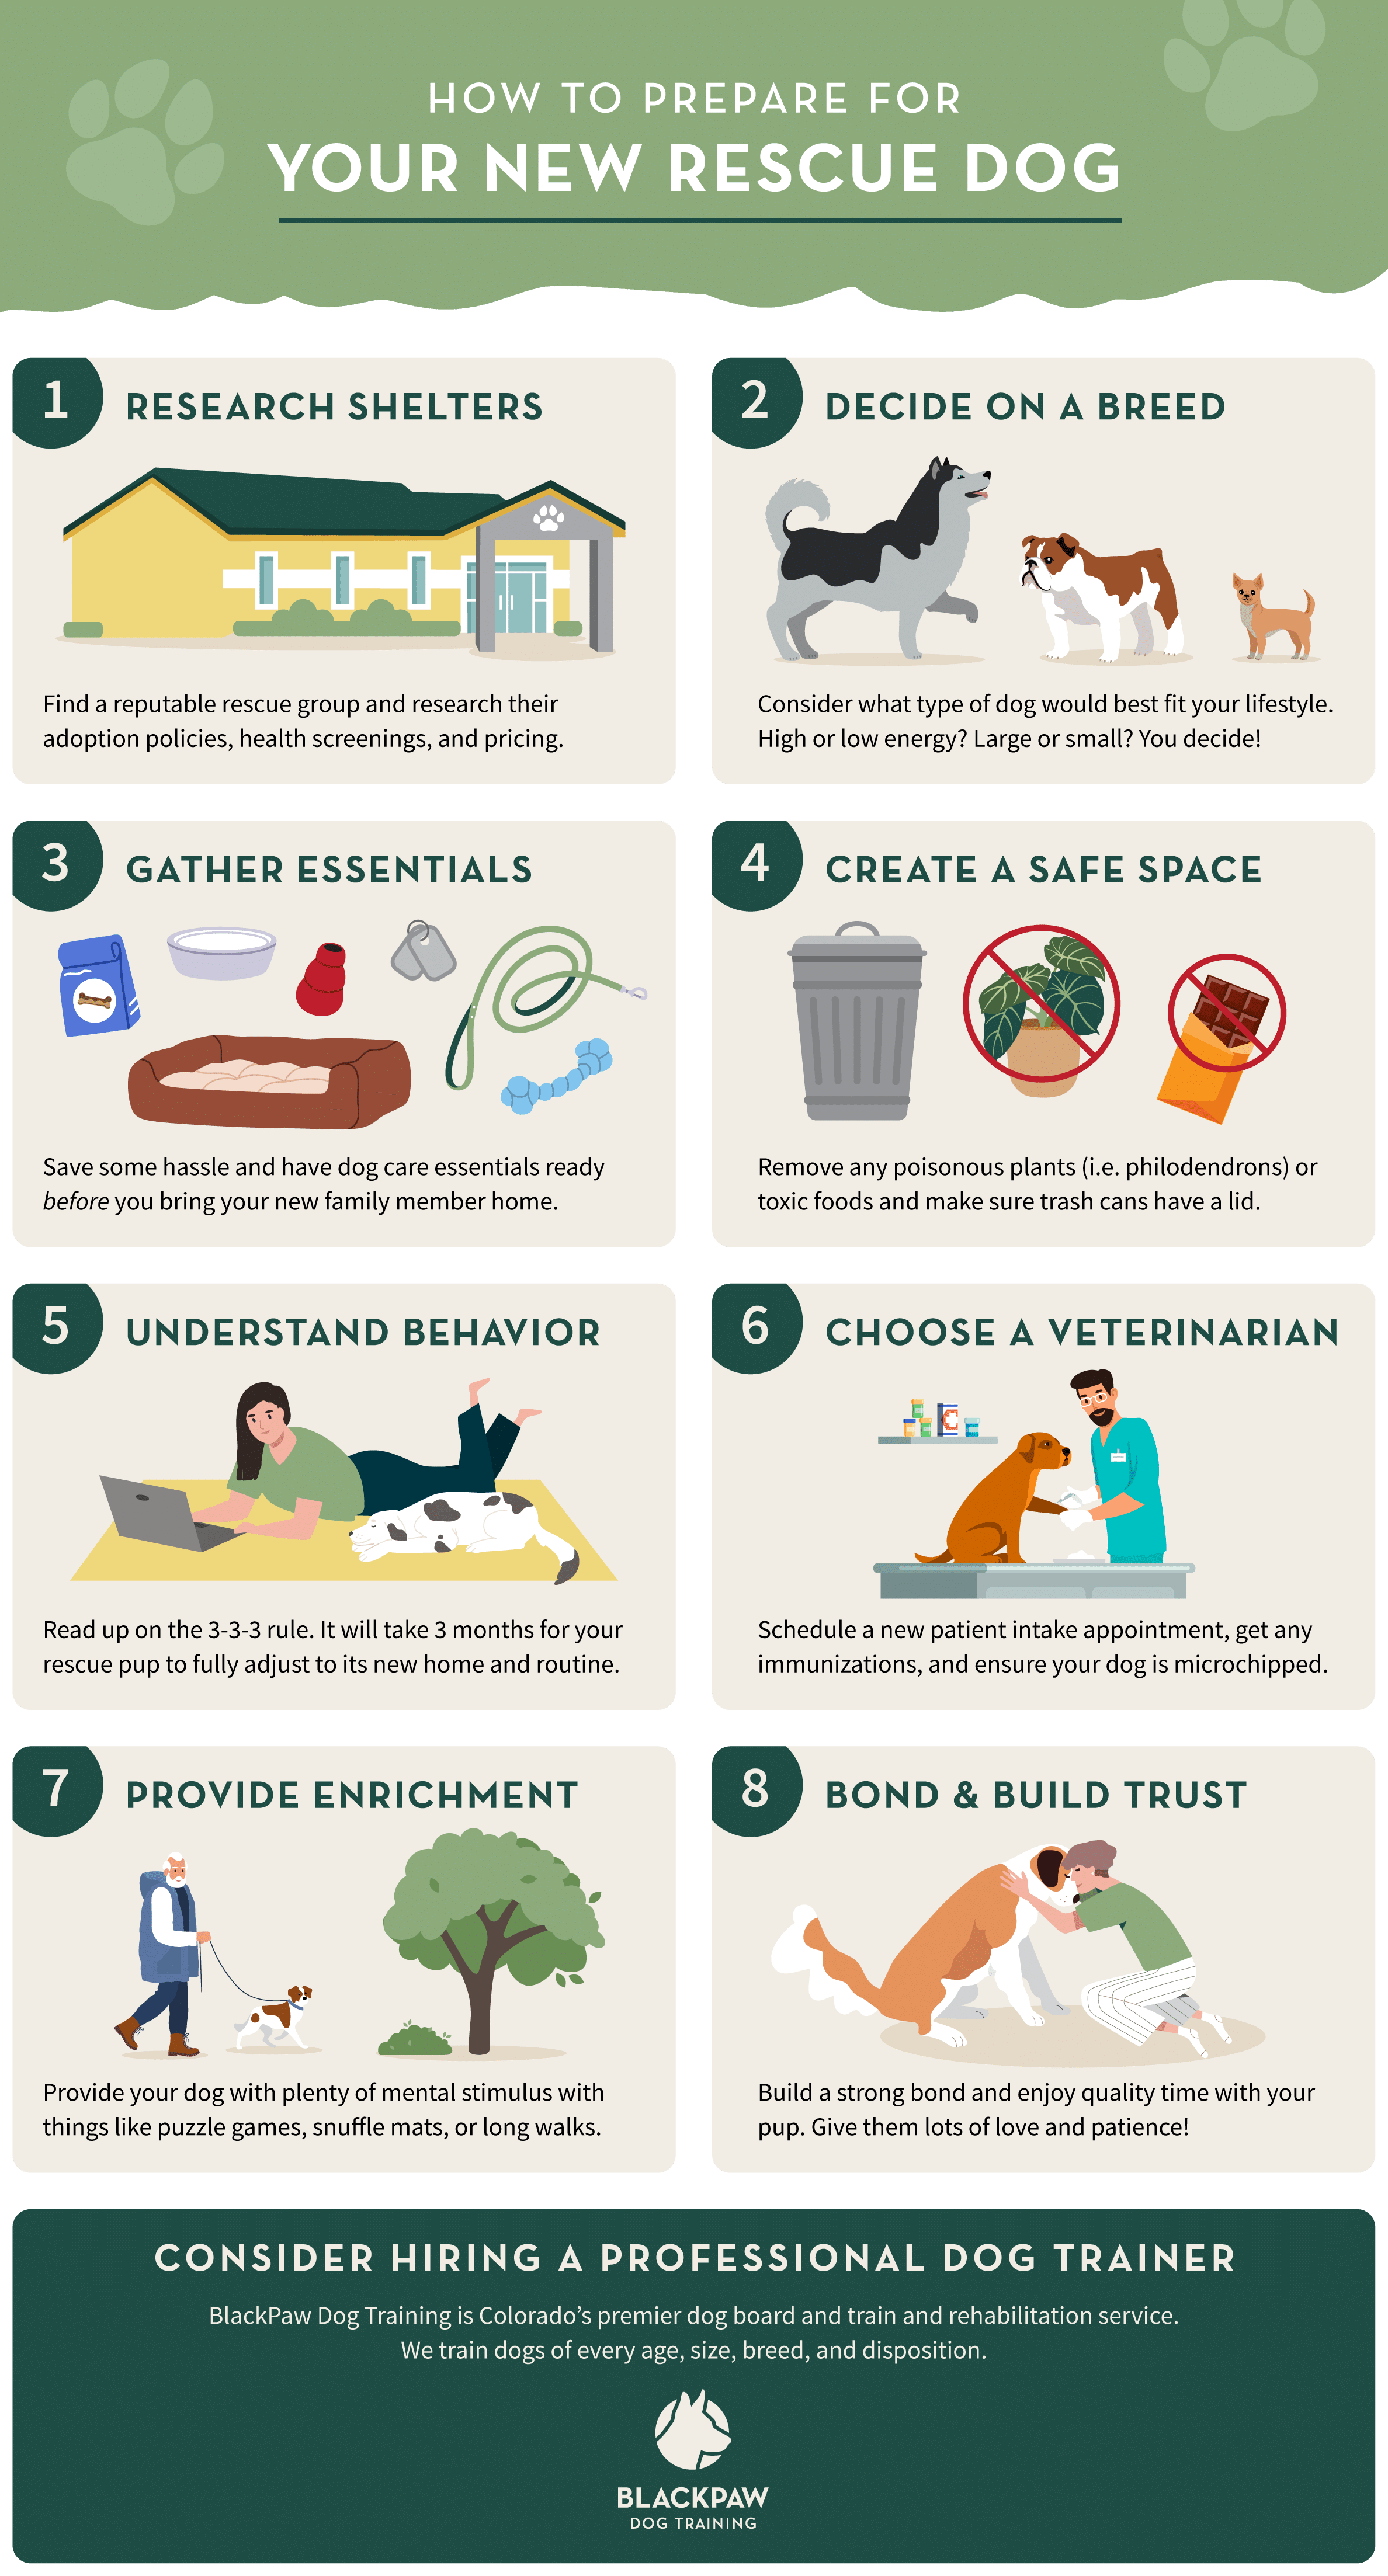 how to prepare for bringing home a rescue dog graphic with steps 1-8 on how to prepare